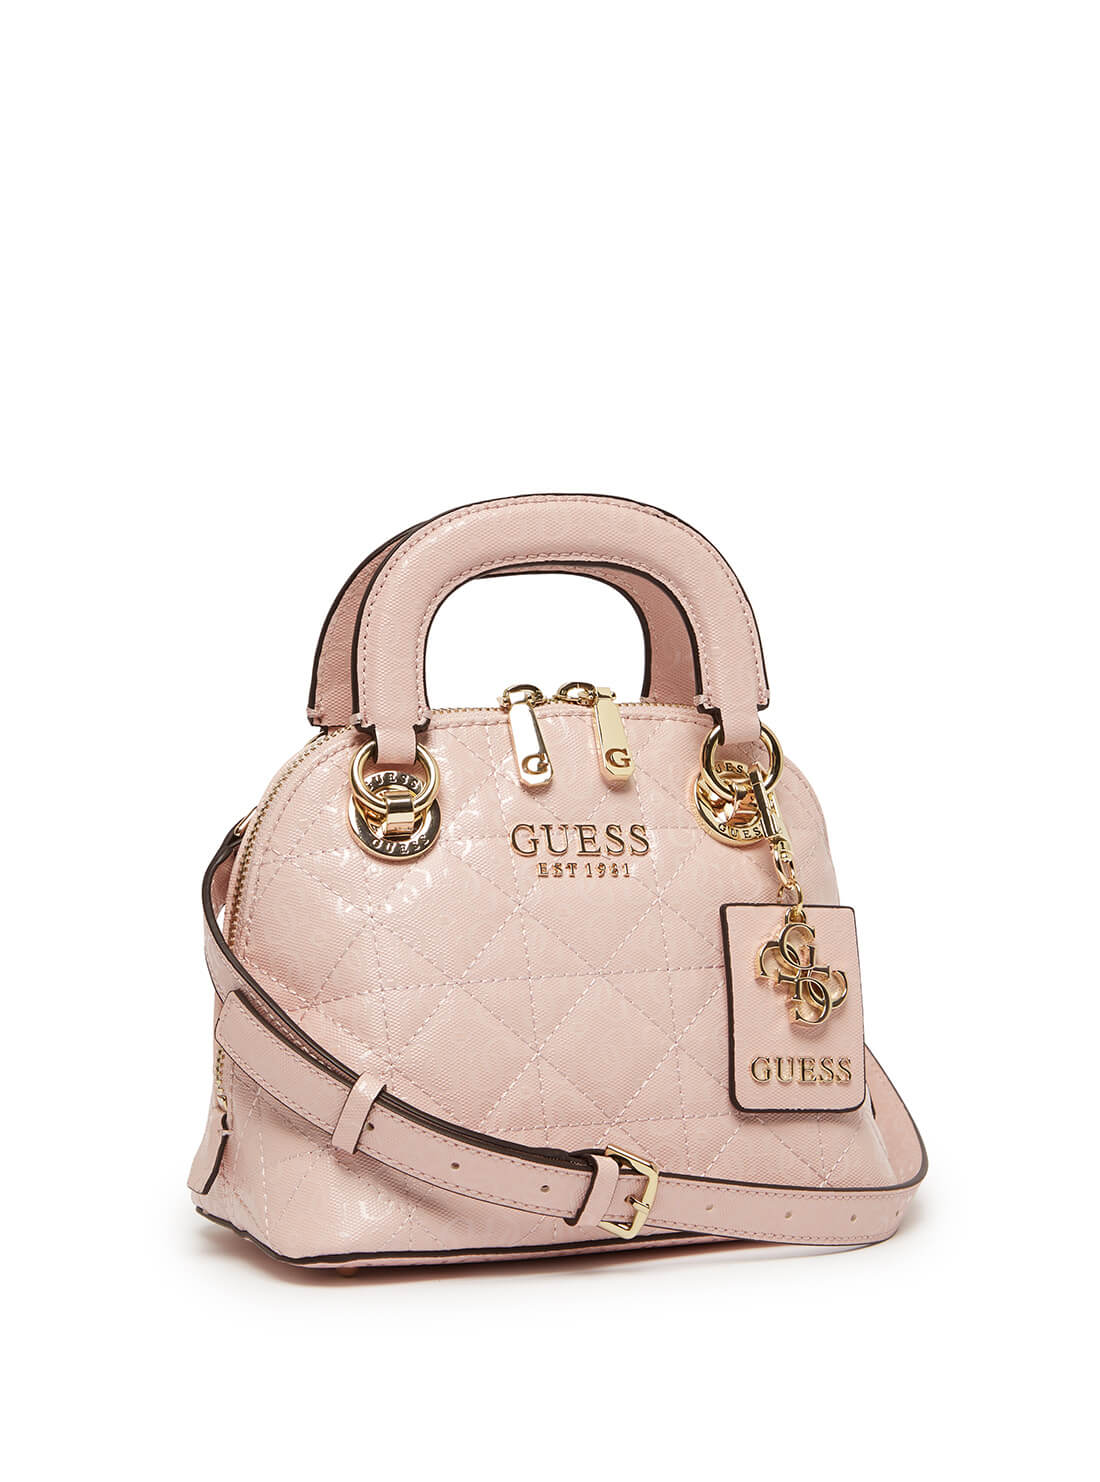 GUESS Womens Pink Cathleen Small Dome Crossbody Satchel GG773705 Front Side View